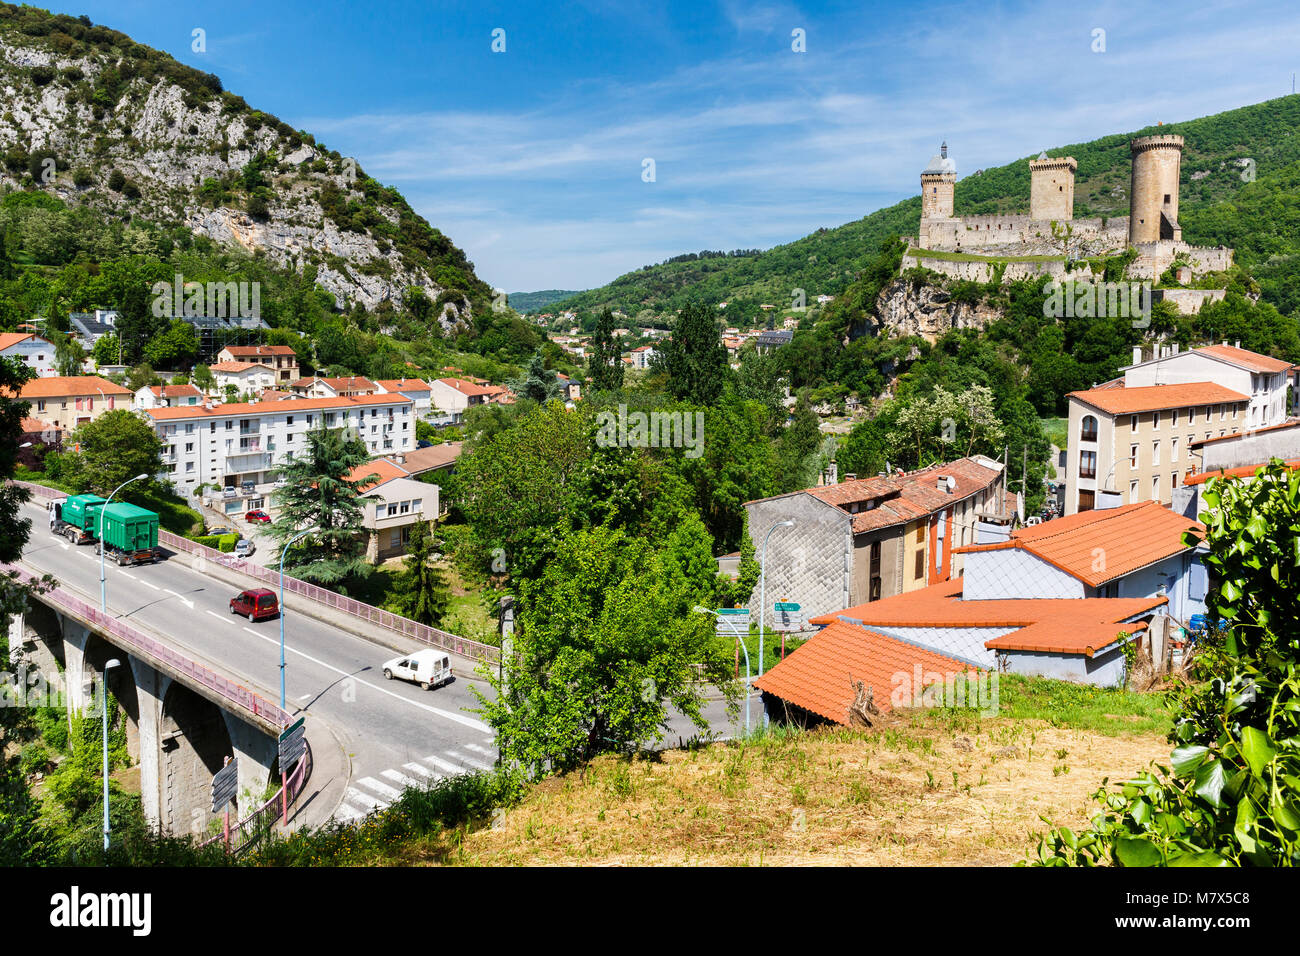 Foix (south-western France), May 2015. Listed as a 'monument historique' (historic monument) since 1840, the fortress dominates the town. In the foreg Stock Photo